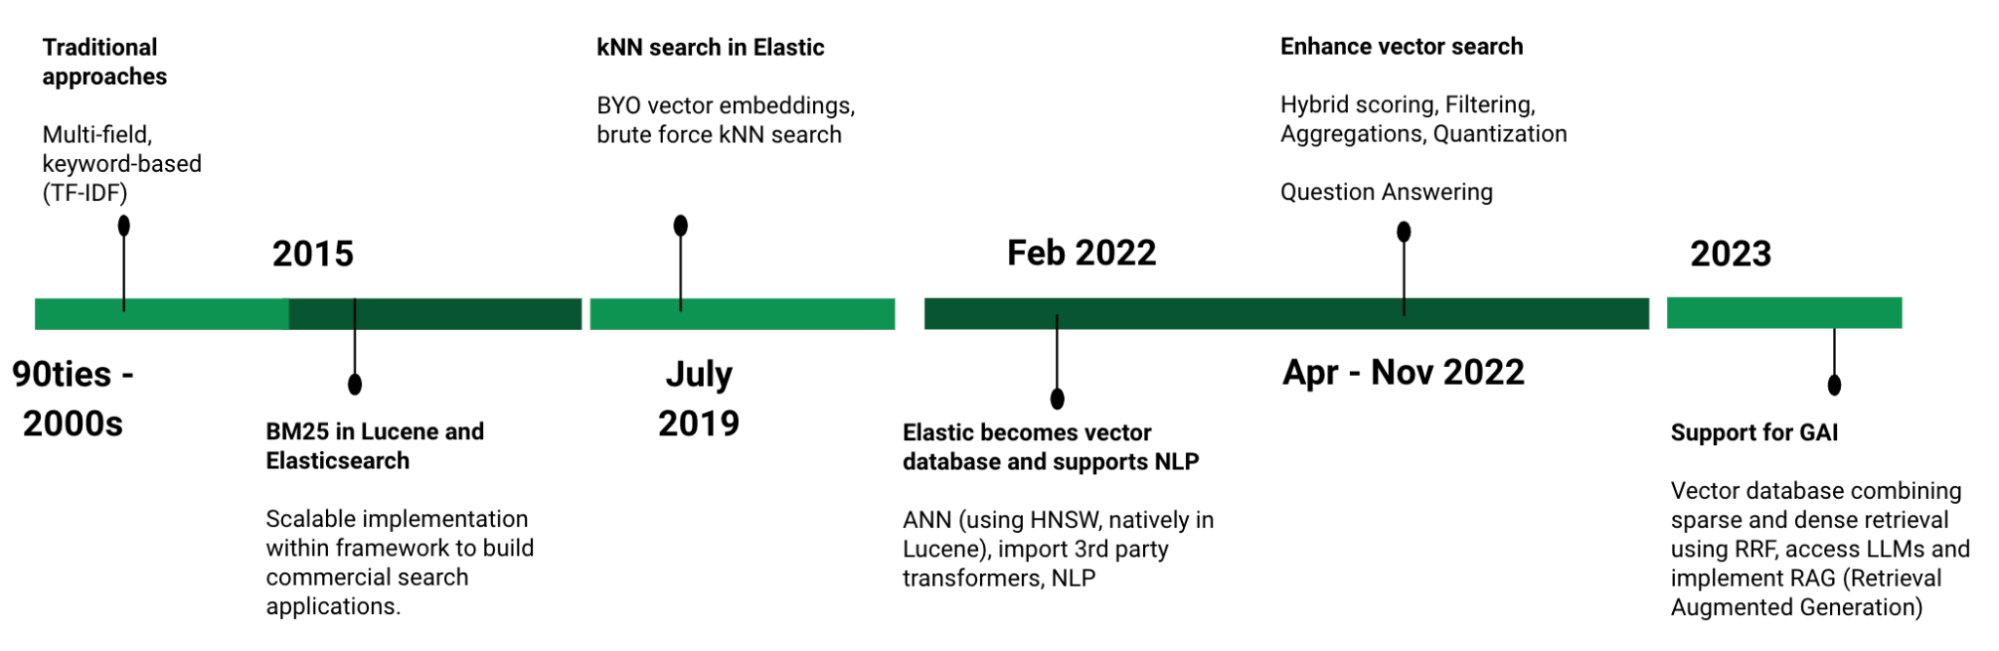 Figure 1: Timeline of search innovations delivered by Elastic, including building up vector search capabilities since 2019